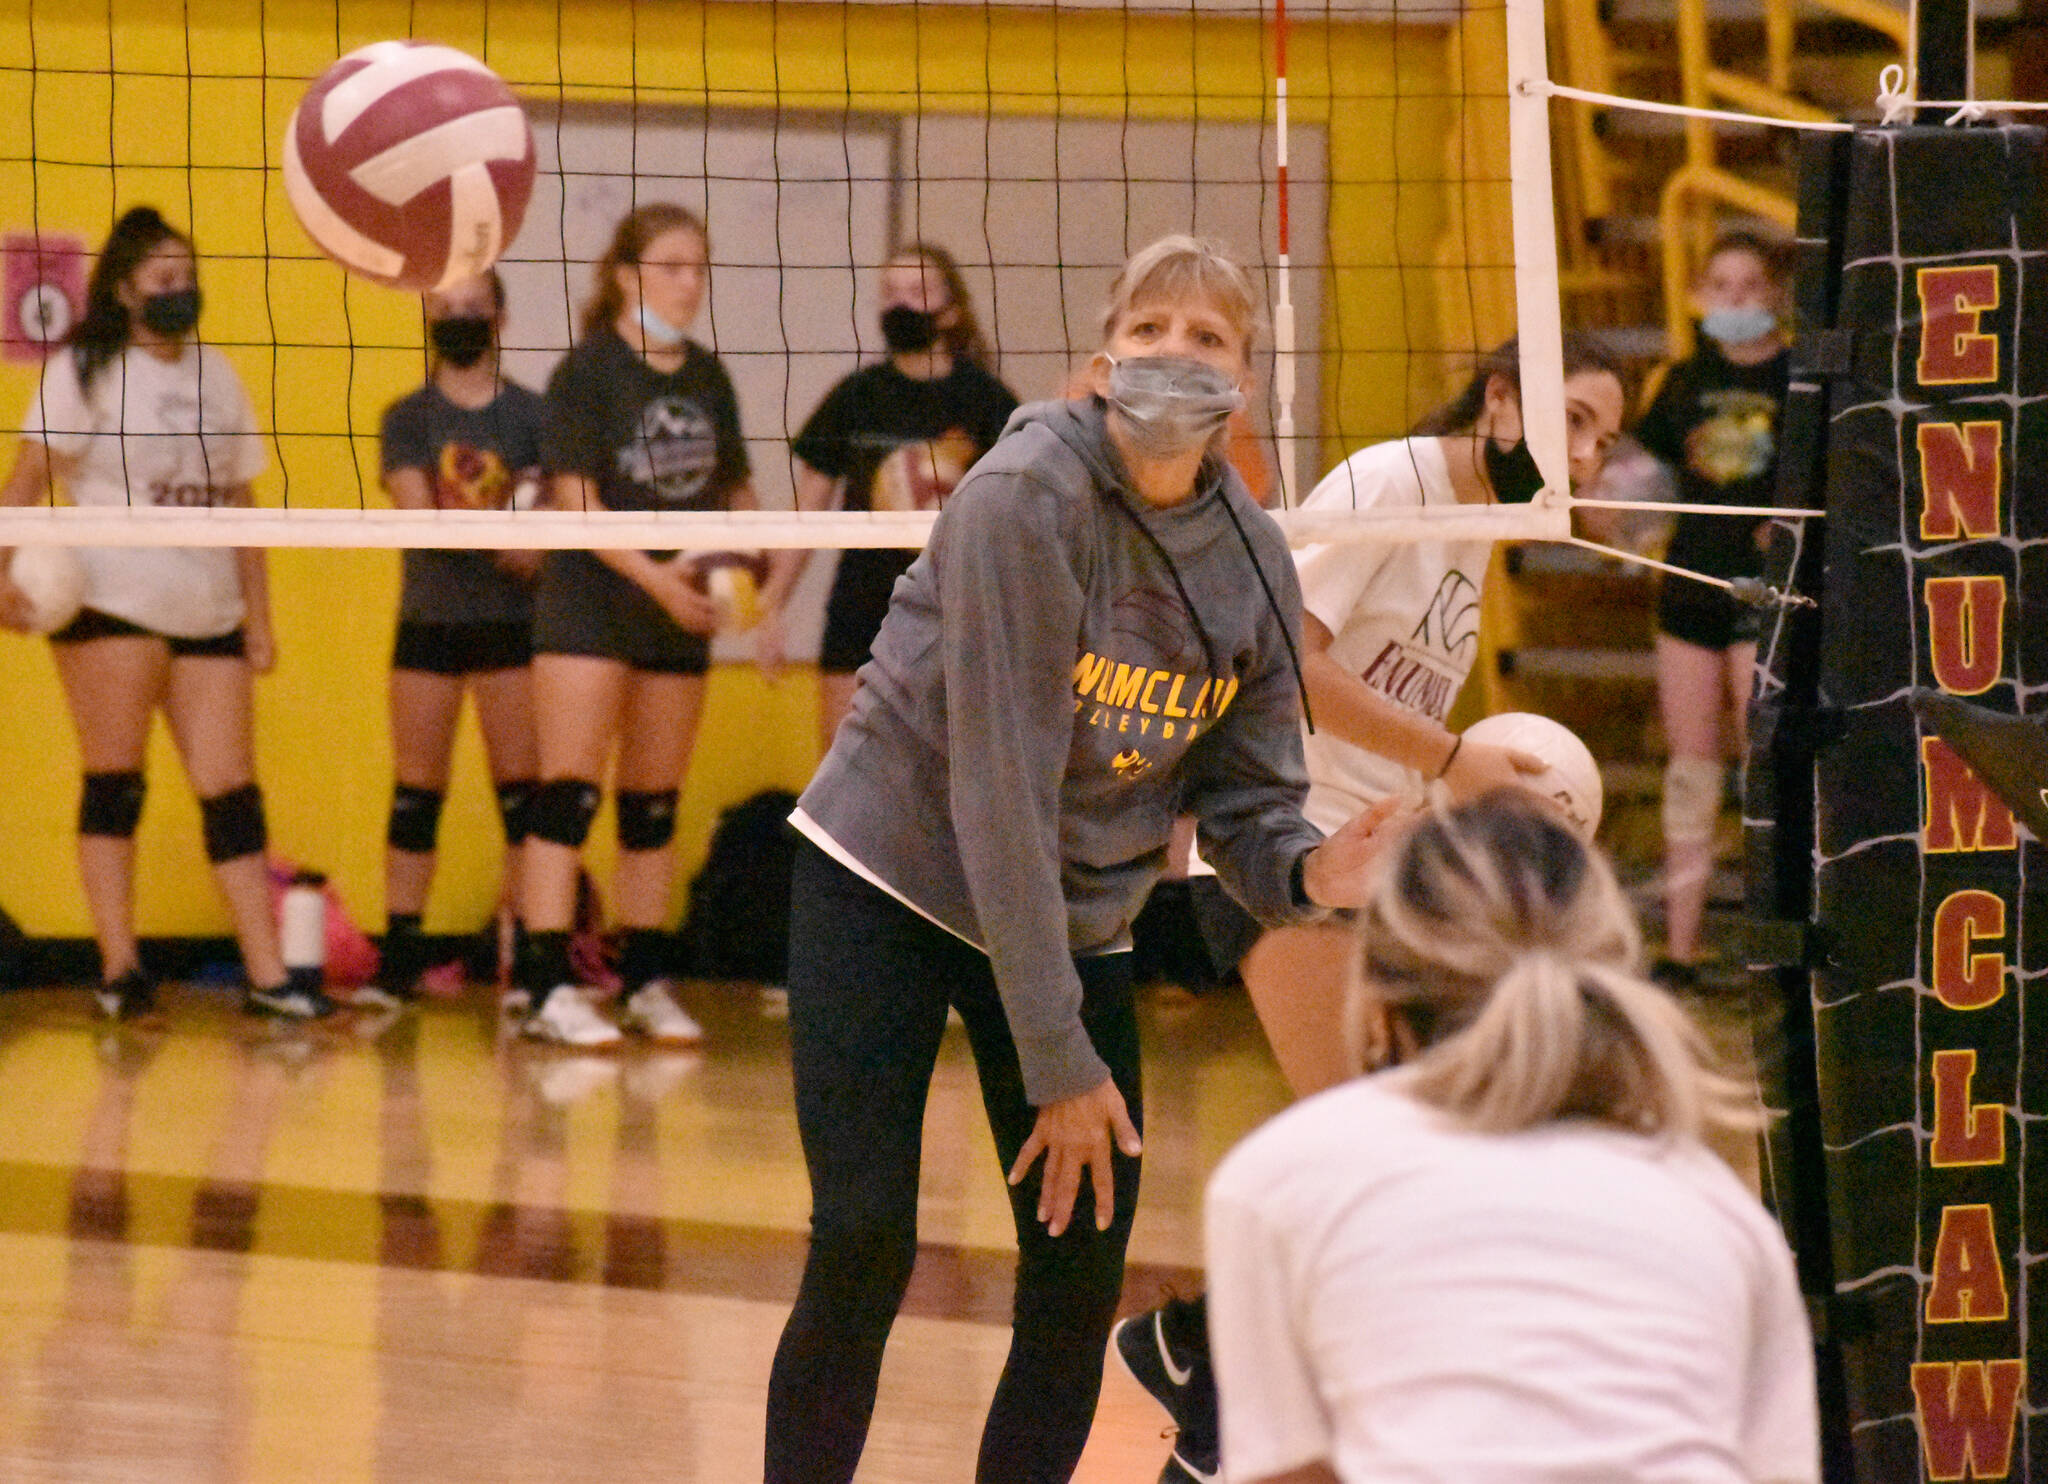 PHOTO BY KEVIN HANSON
Fall coaches have been putting their squads through their early-season paces, all in preparation for the coming campaigns. Above, Enumclaw High volleyball coach Jackie Carel begins a drill.